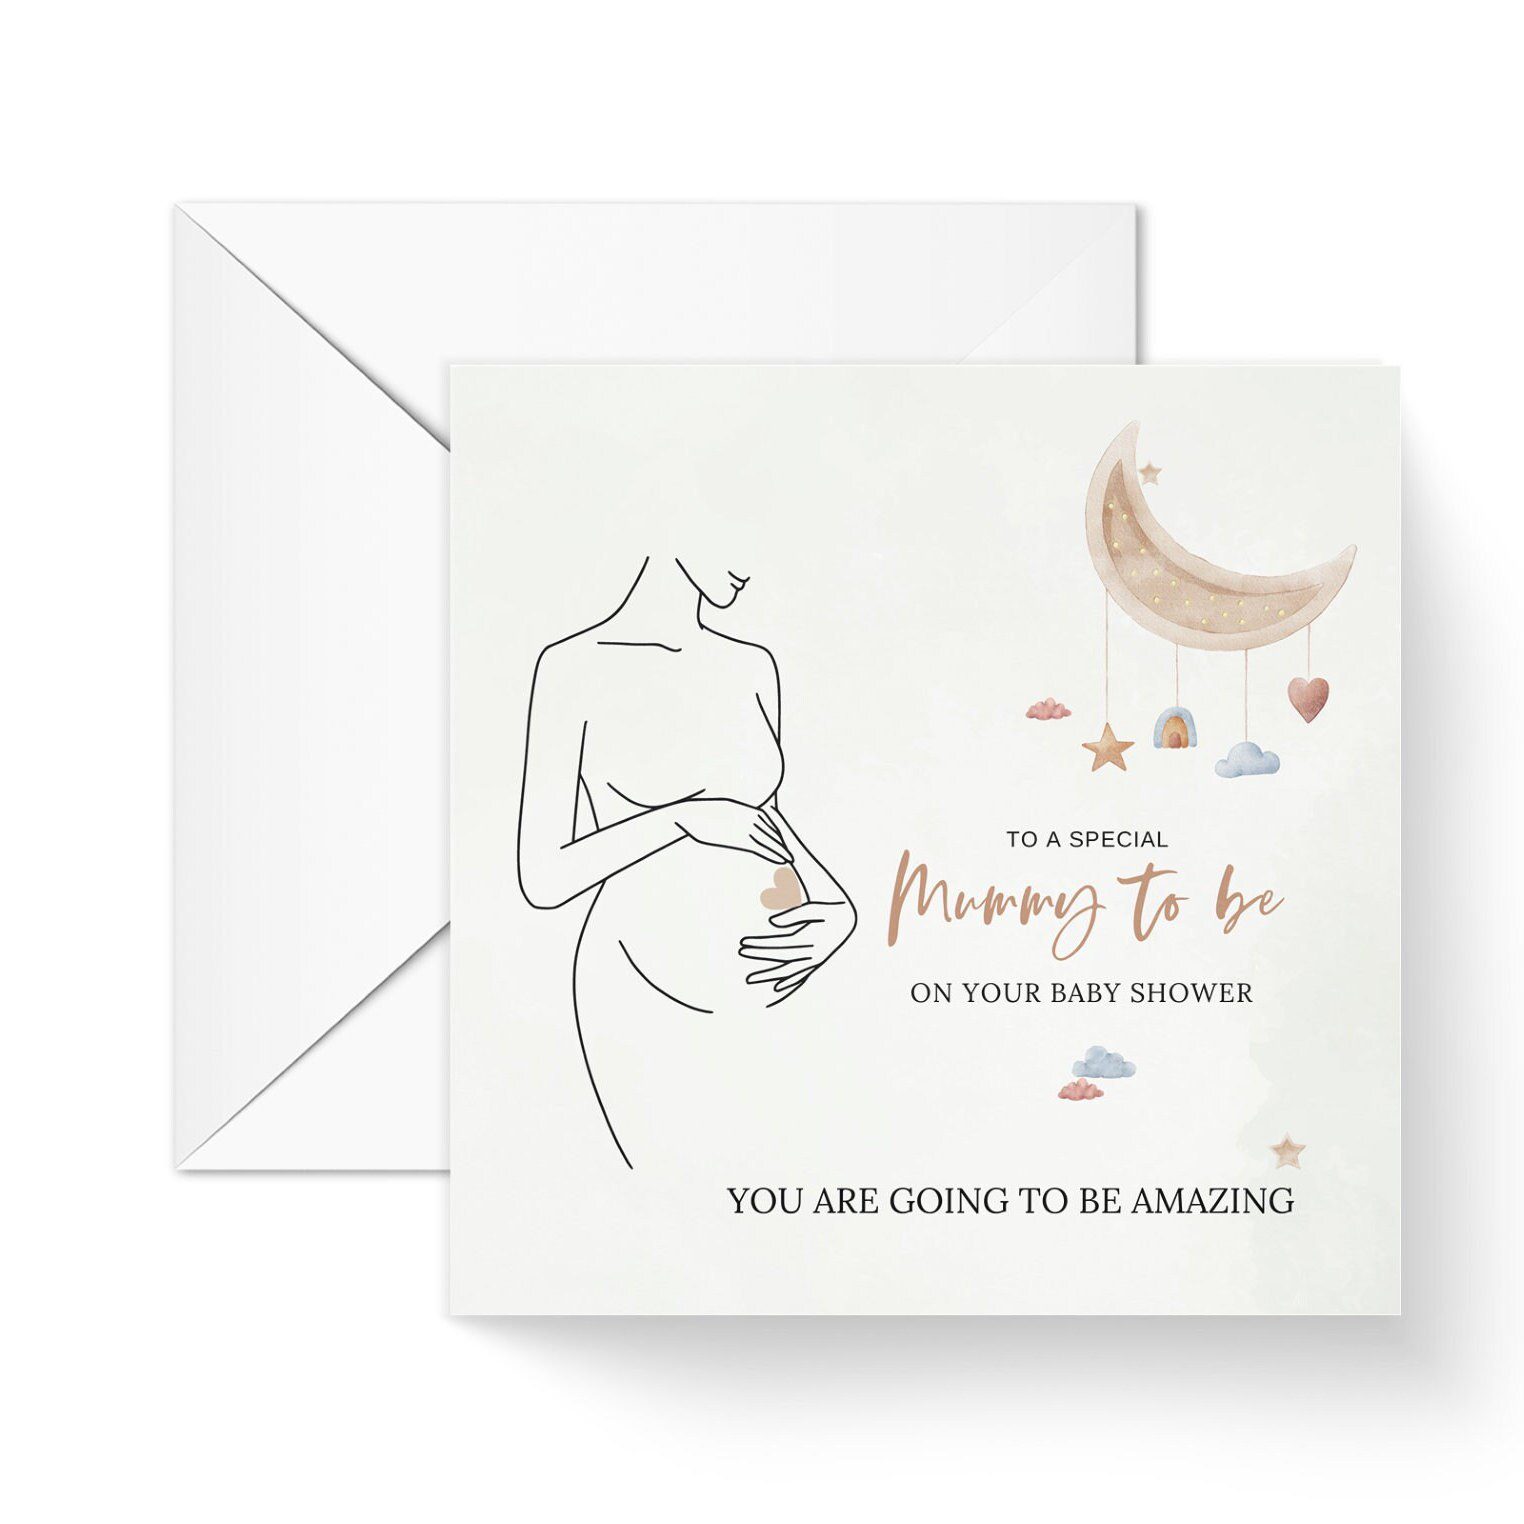 Mummy to be pregnancy card